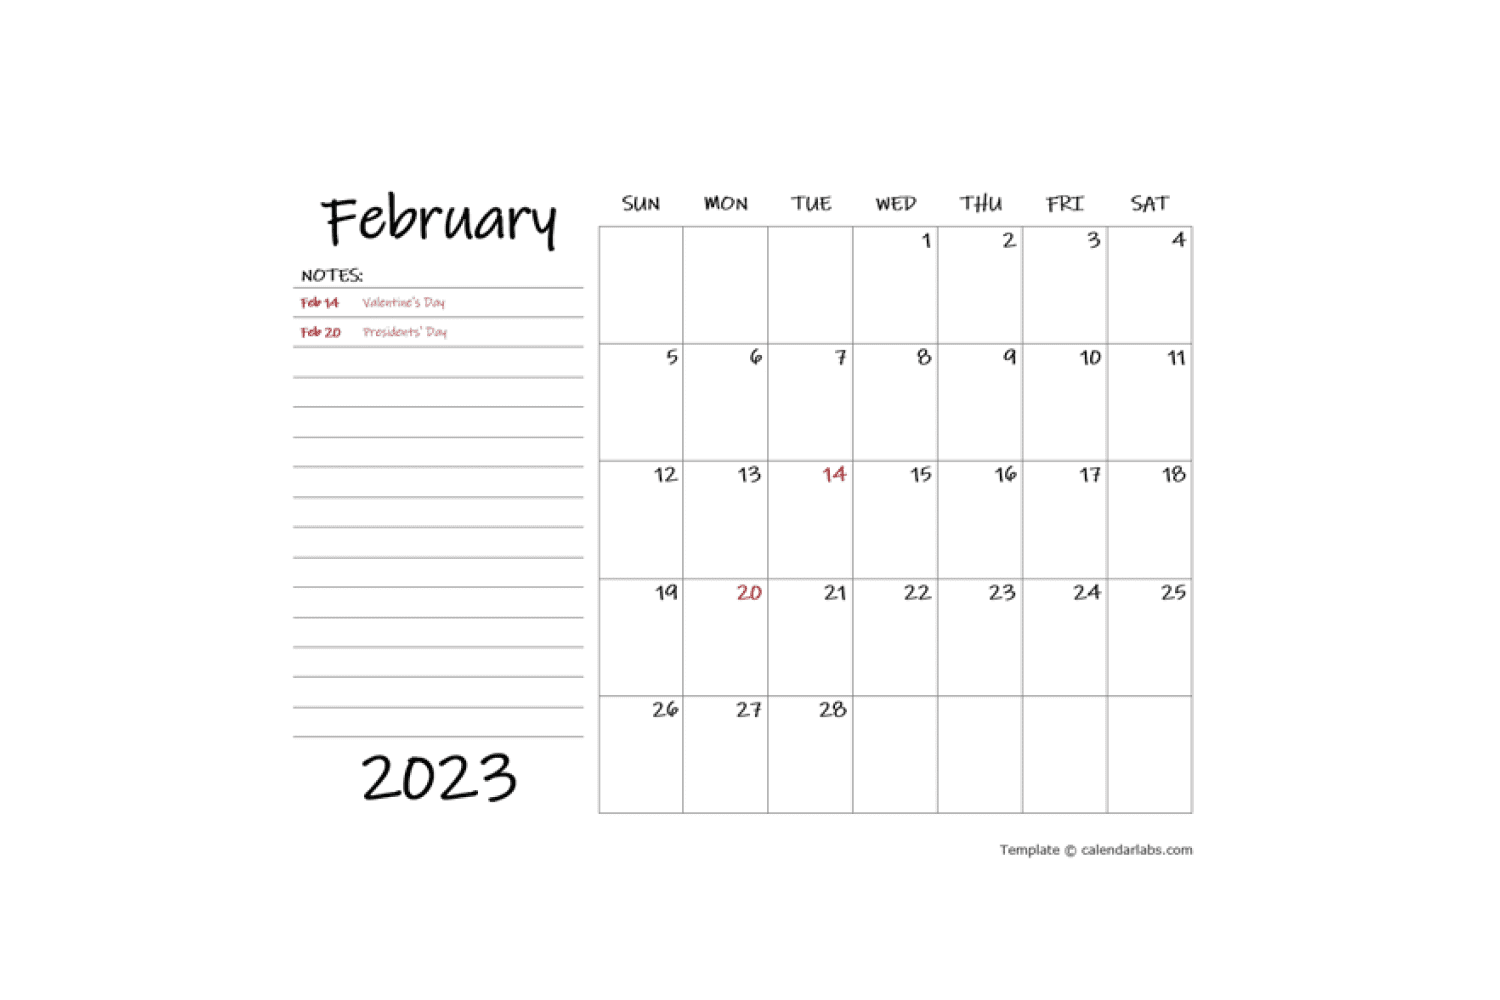 Calendar for February with holidays and a large space for notes on the left.